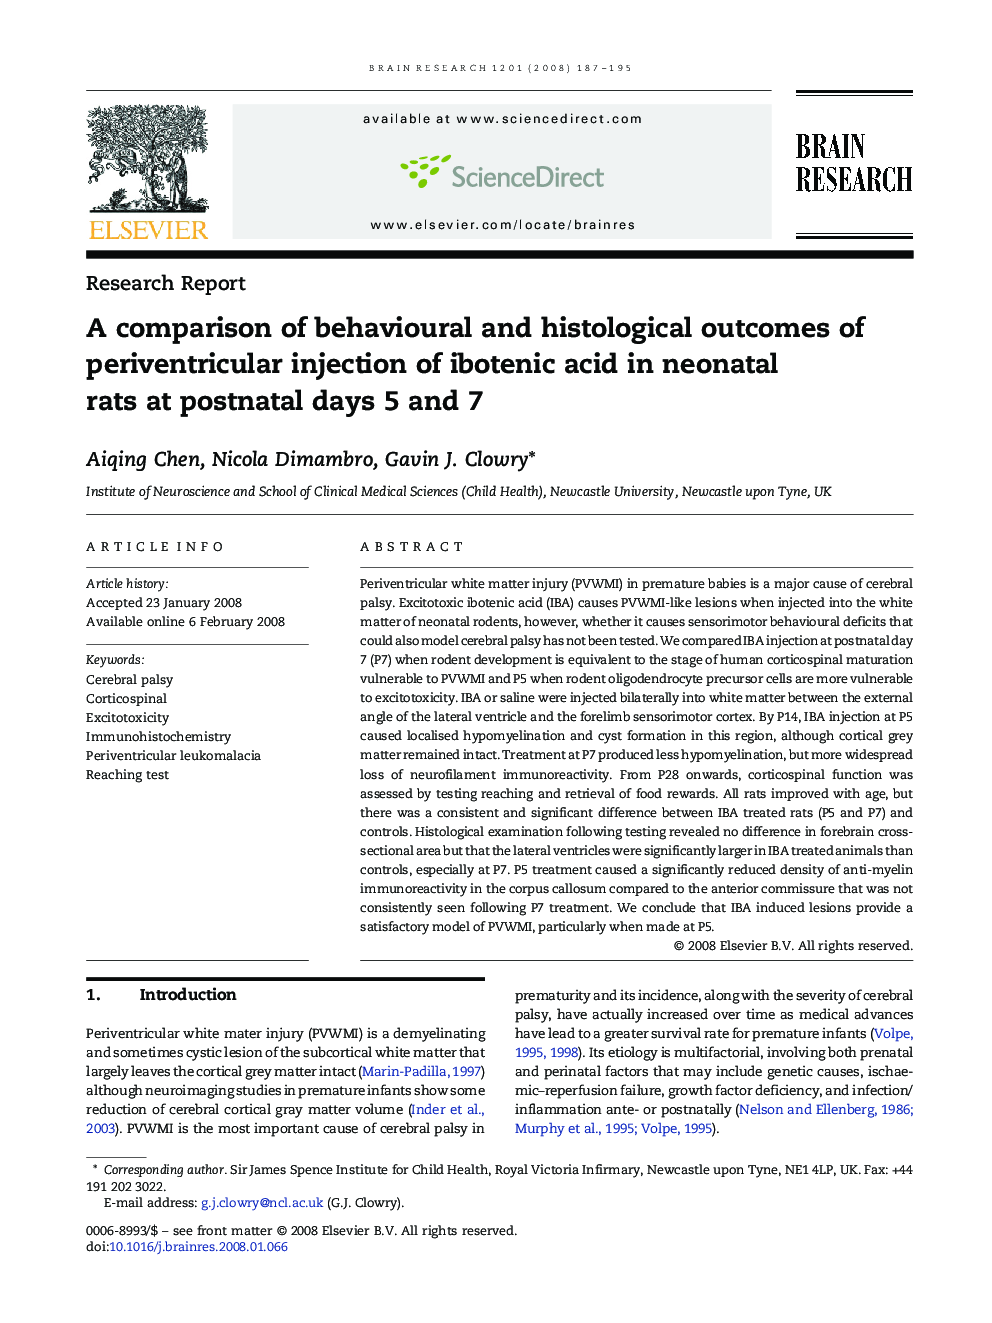 A comparison of behavioural and histological outcomes of periventricular injection of ibotenic acid in neonatal rats at postnatal days 5 and 7